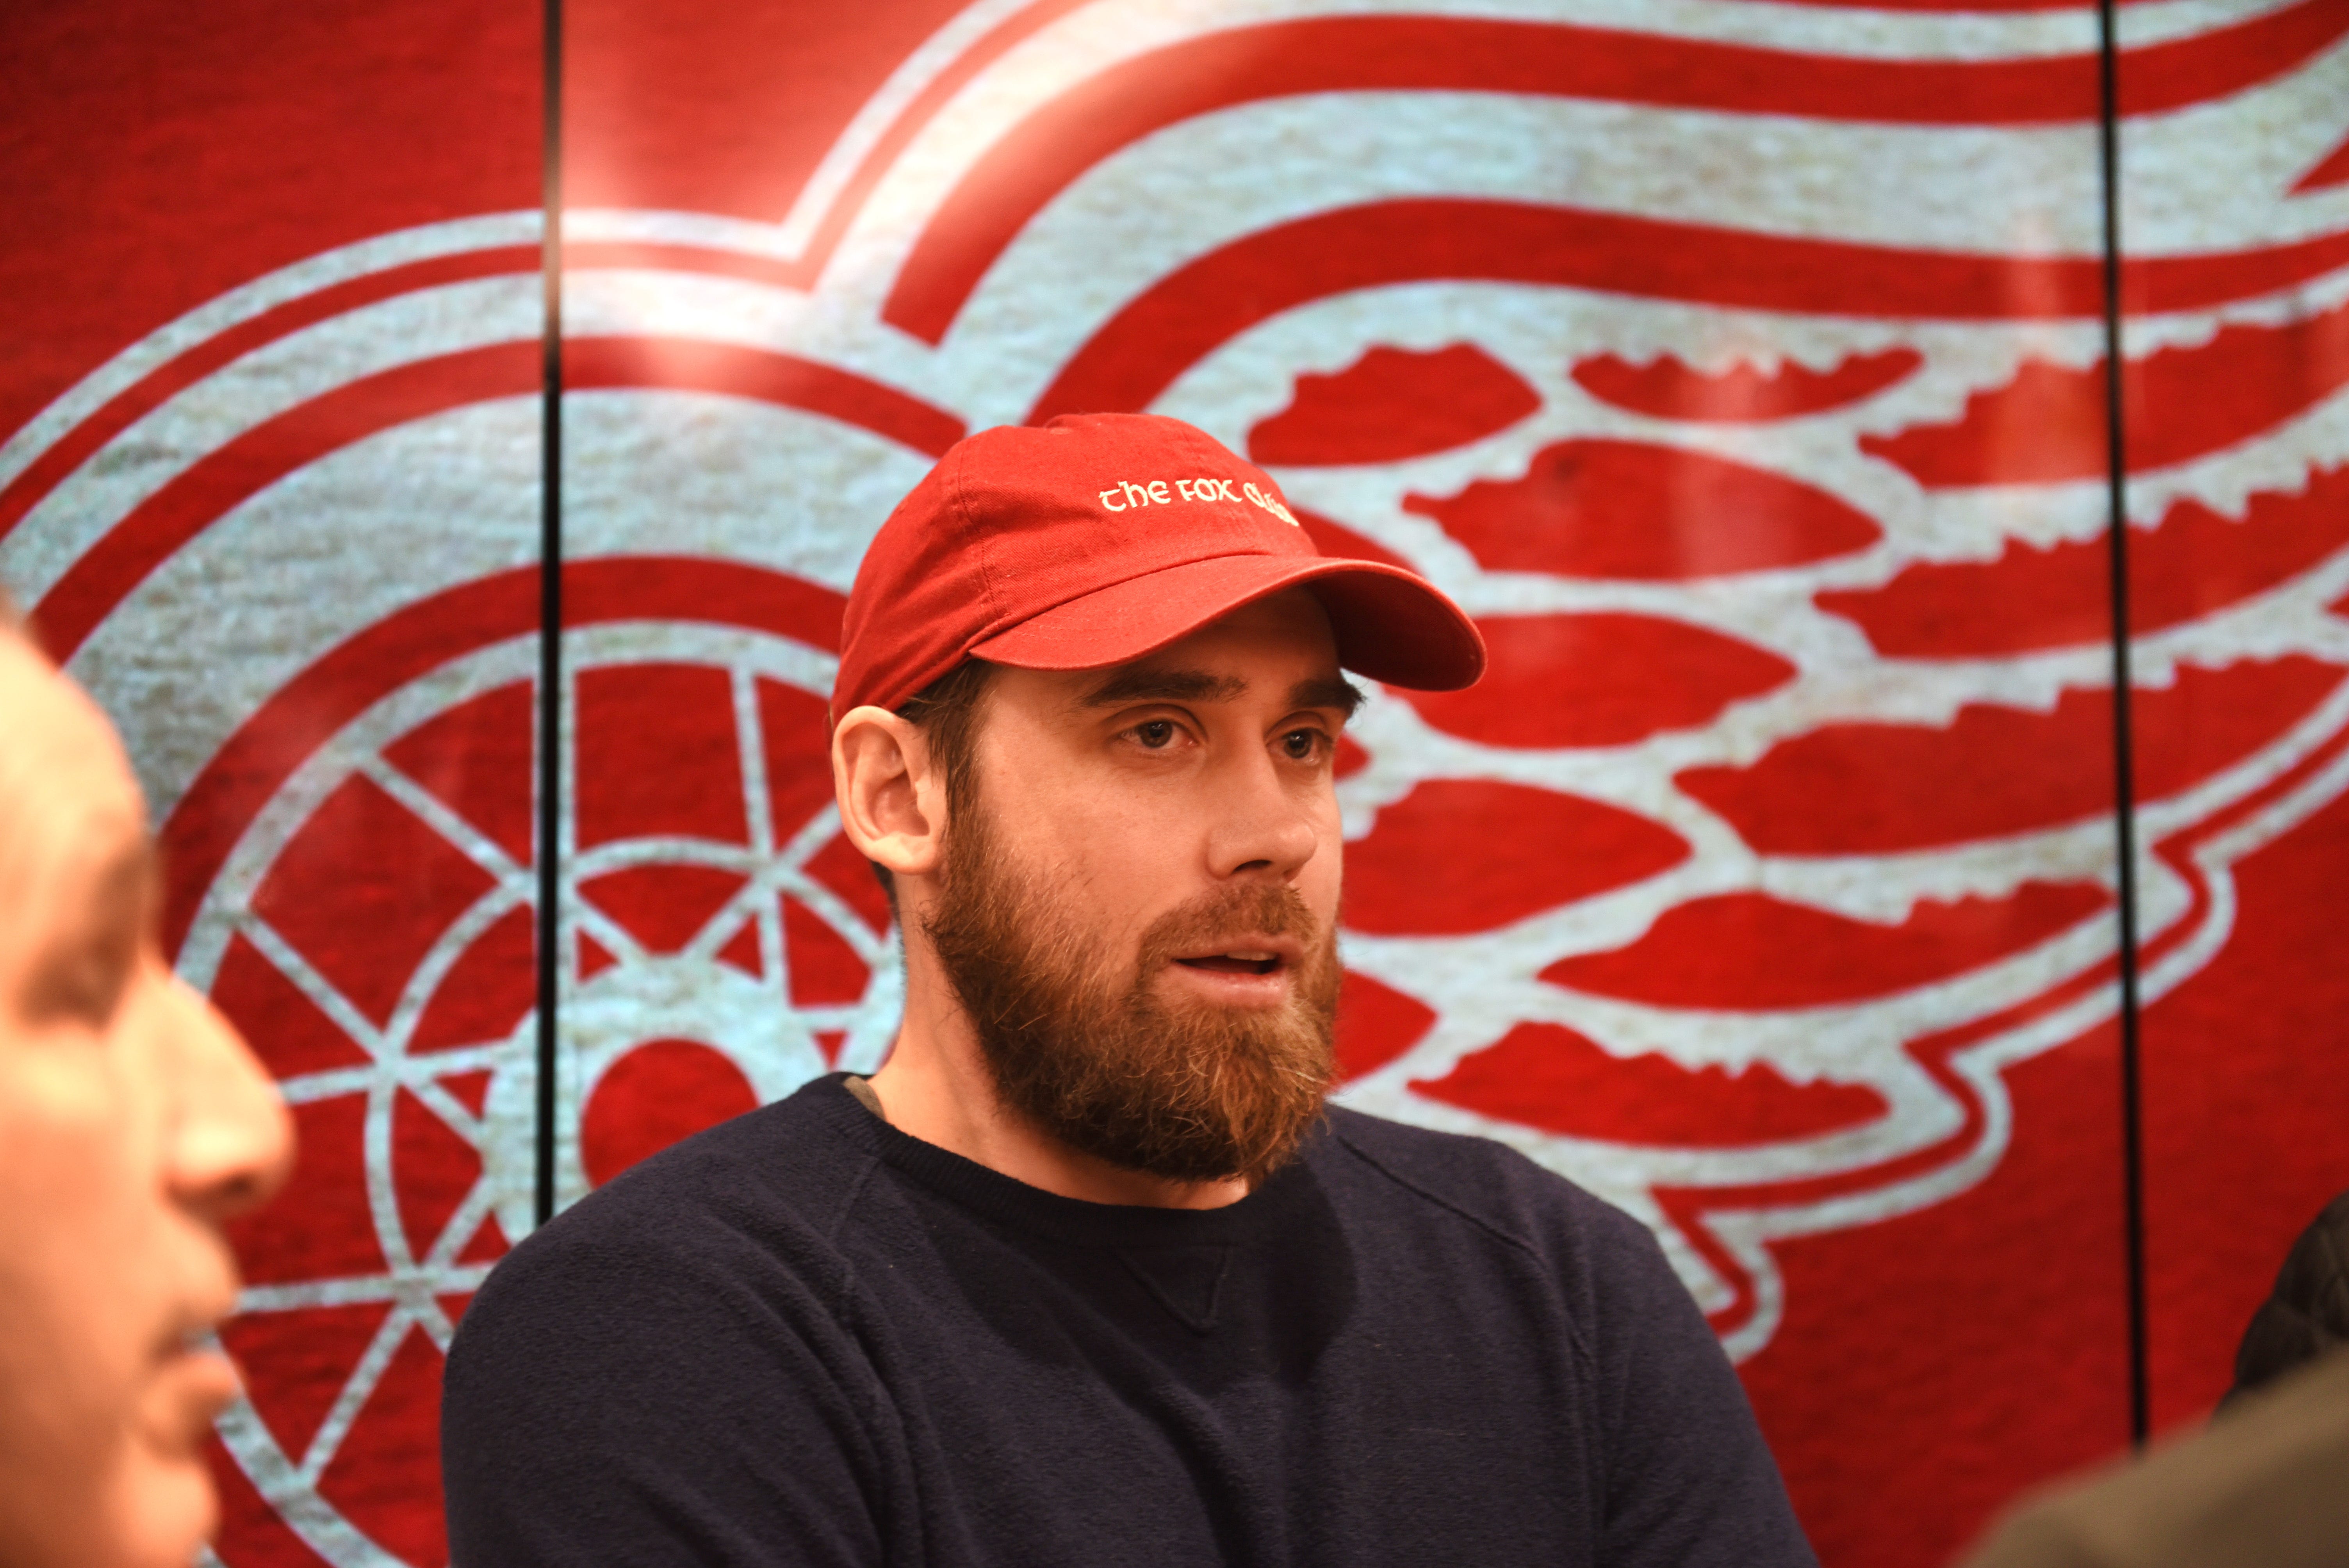 Detroit Red Wings captain Henrik Zetterberg speaks about next season after the team missess the playoffs during a news conference at Little Caesars Arena on April 10, 2018.